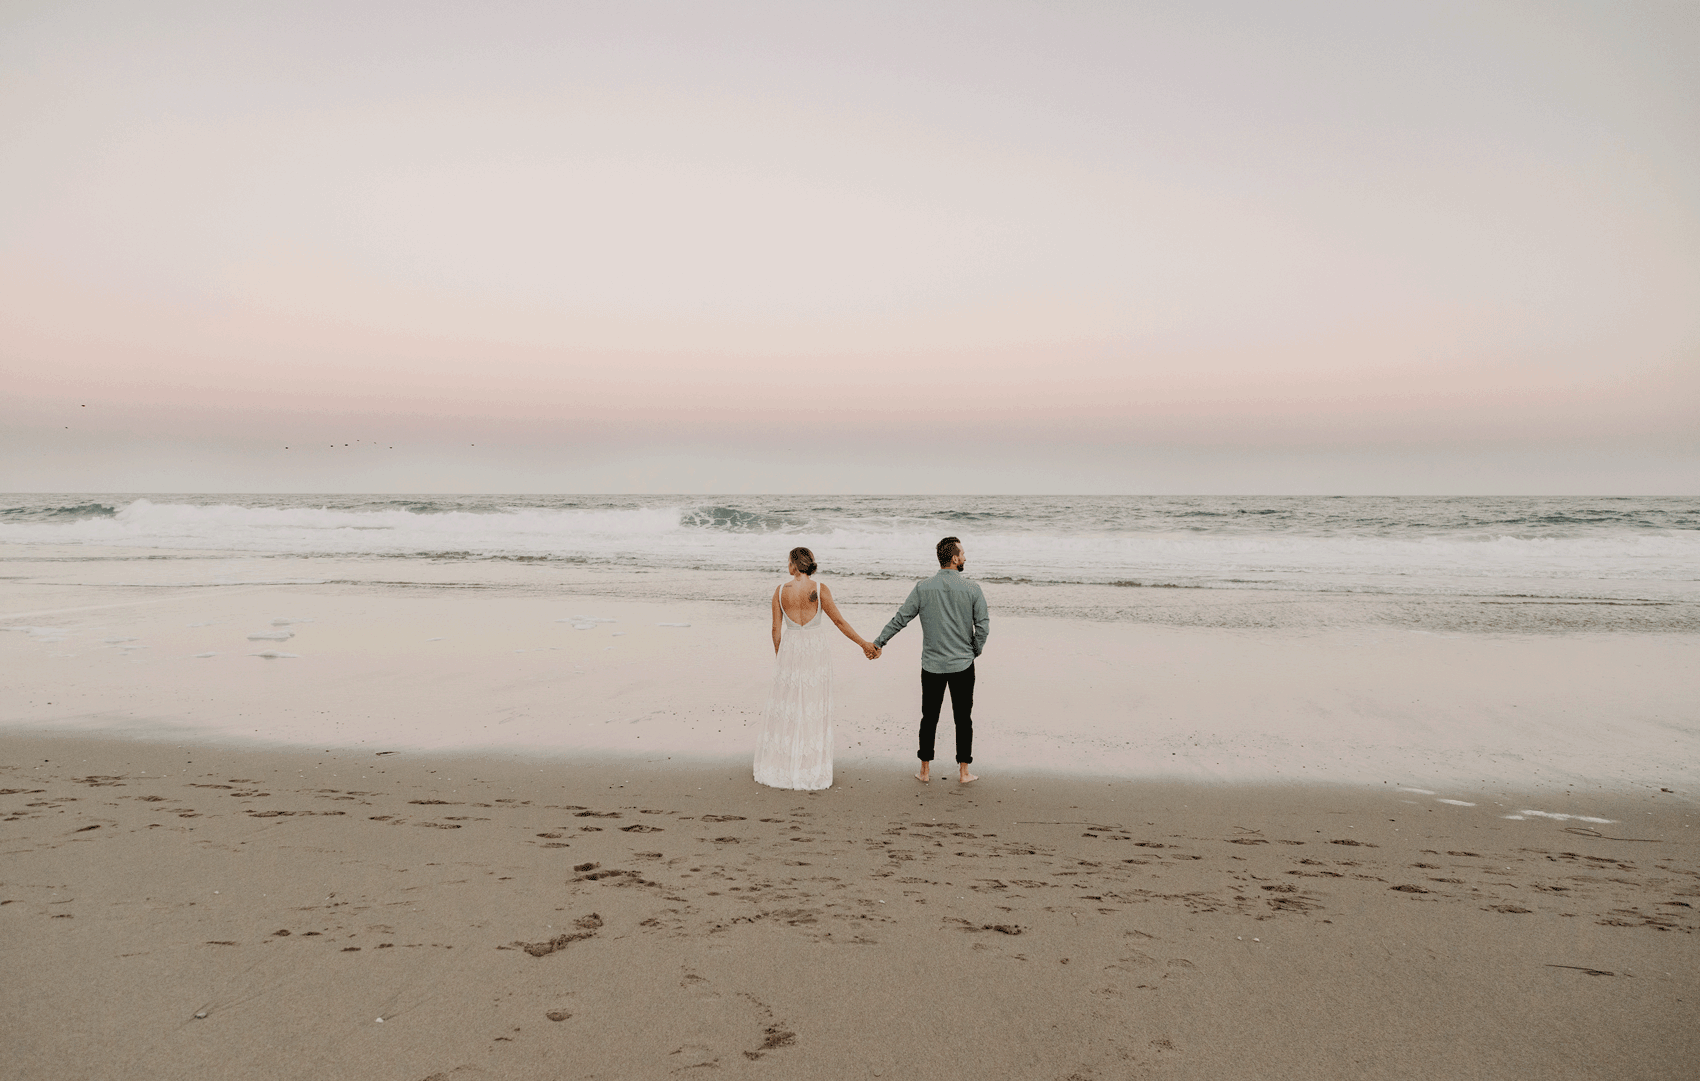 moving GIF of a bride and groom  holding hands as they stare out at the ocean waves